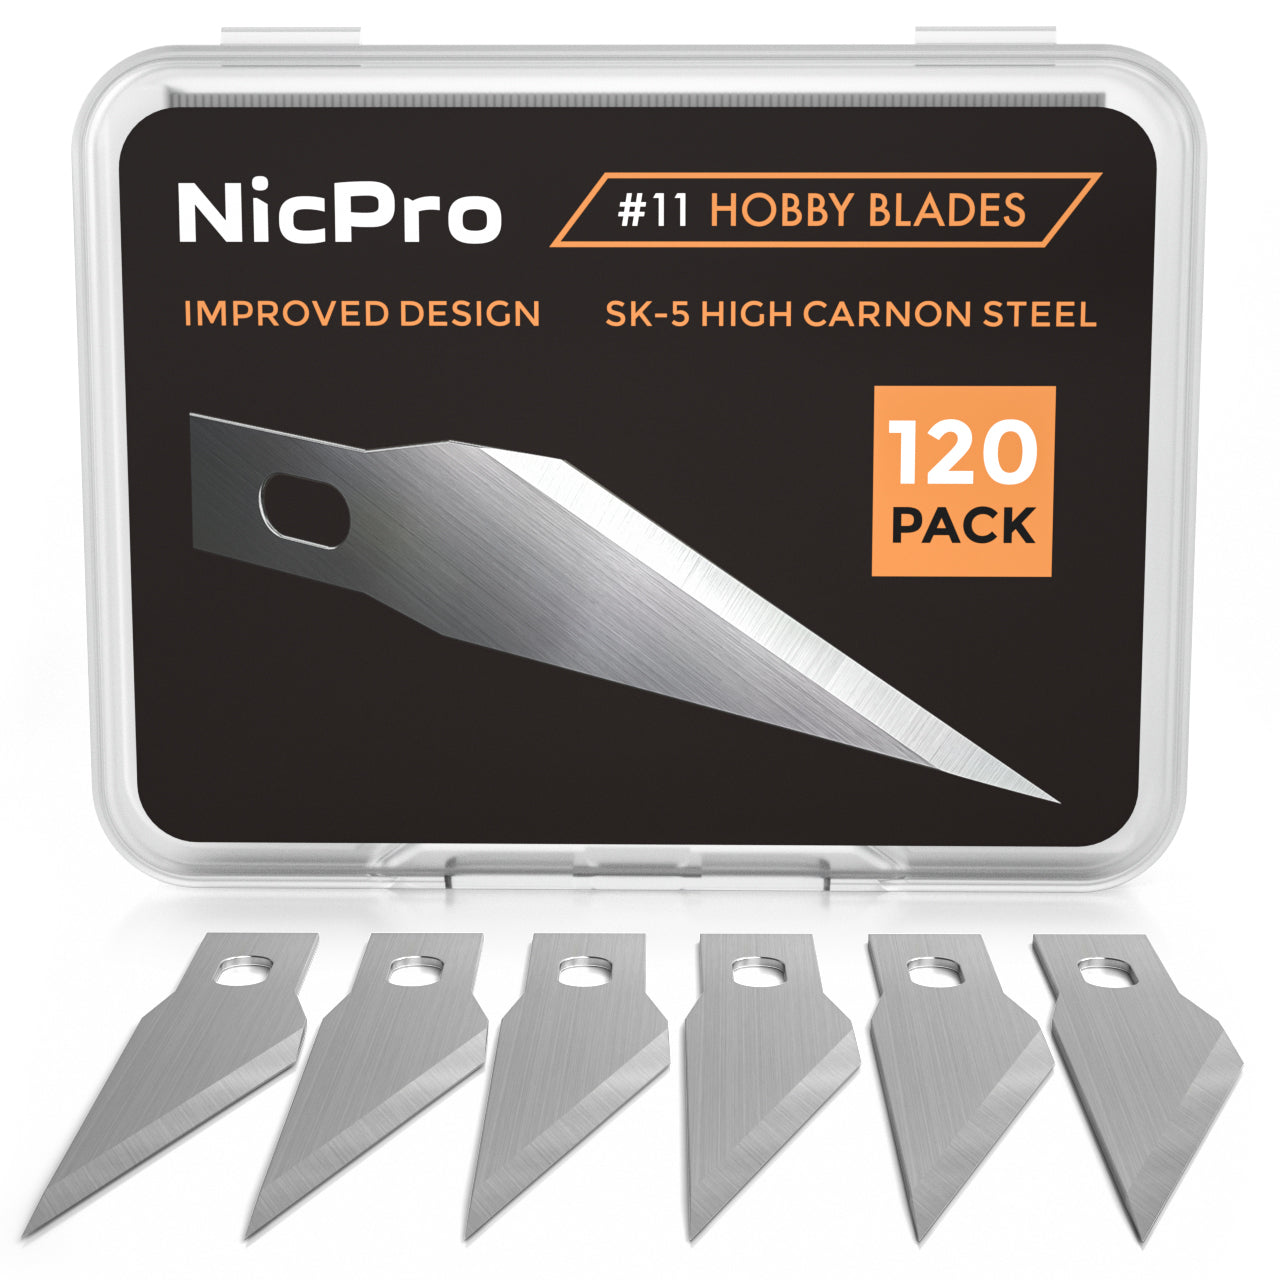 Nicpro 120 Pcs Hobby Blades Set SK-5, Utility Excel #11 Art Blades Refill Cutting Tool with Storage Case